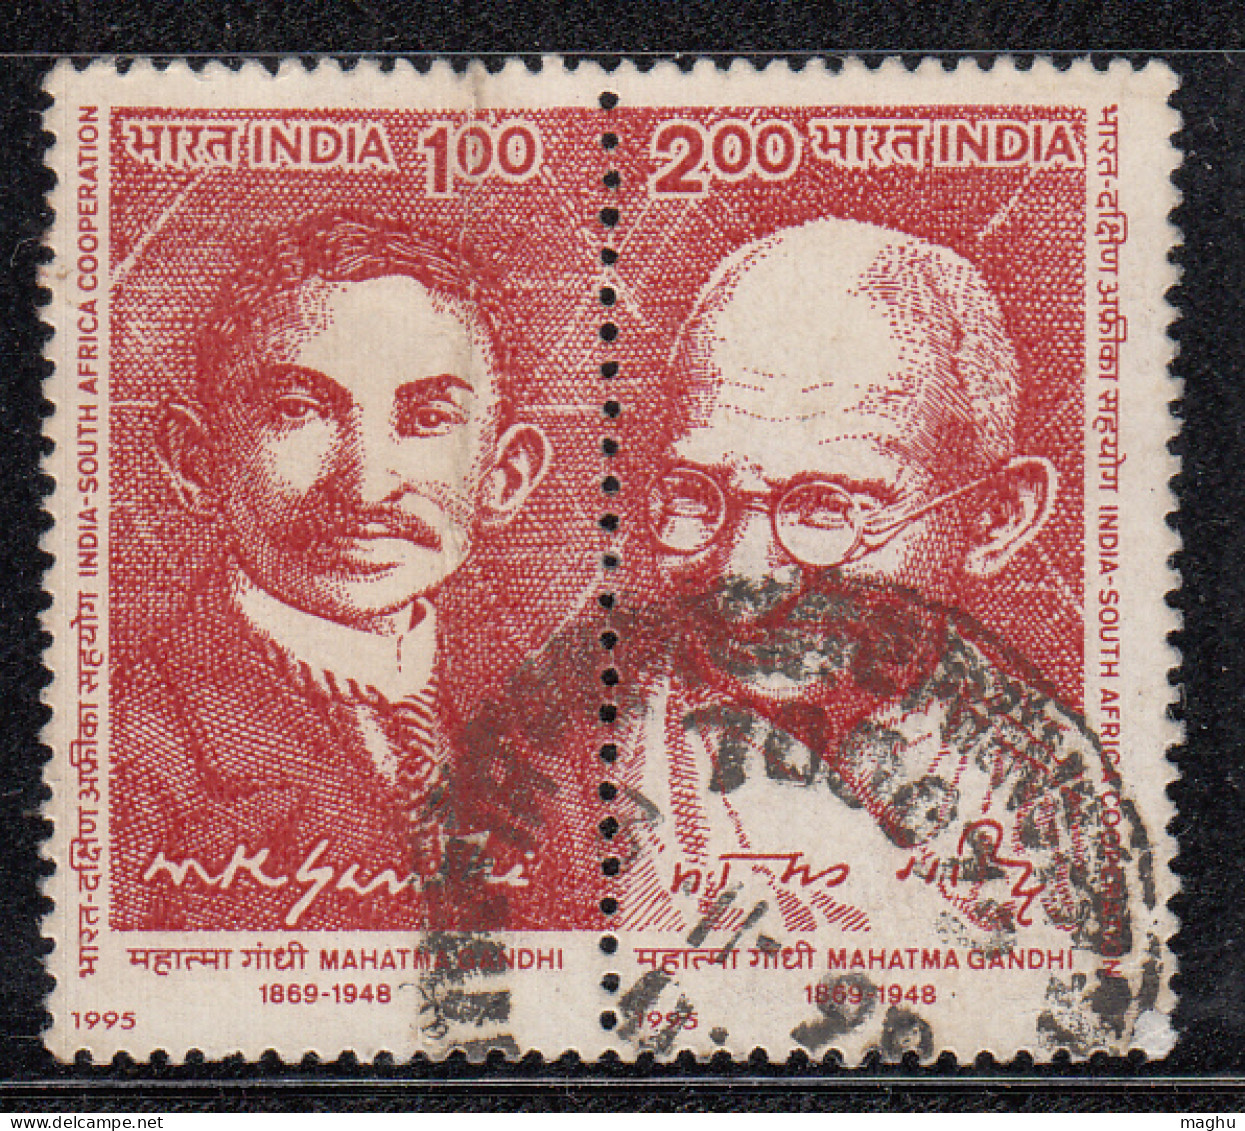 Se-tenent Used India 1995, South Africa Conference, Gandhi As Young Barrister And Old Age, - Oblitérés